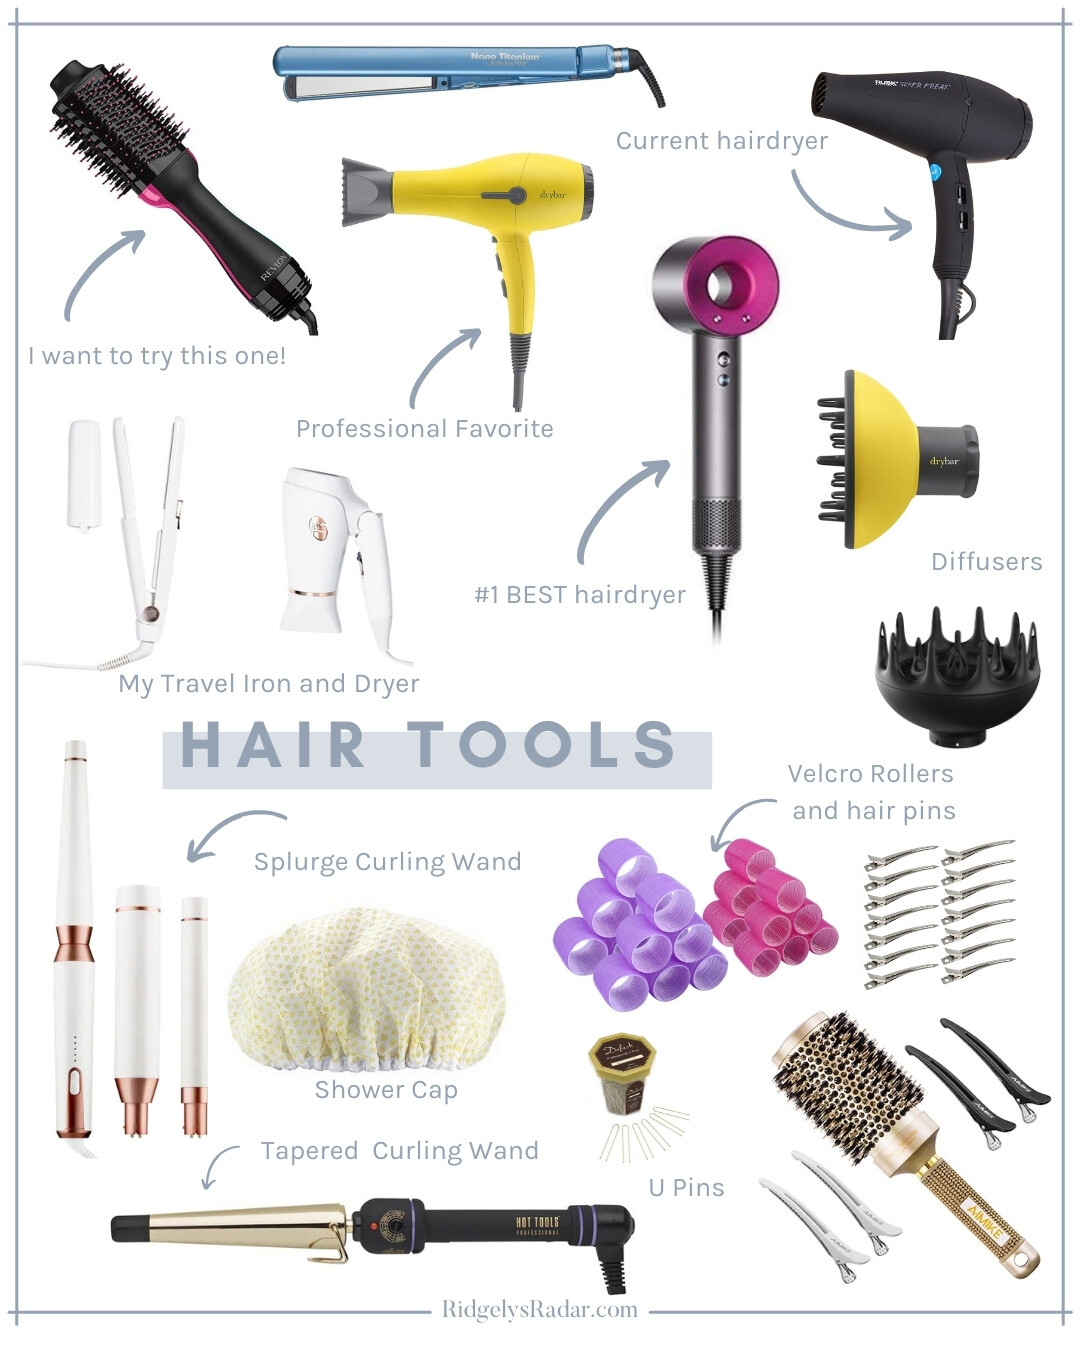 It's hard enough to do your own hair but not having the right tools is even harder. Here are my favorite hair tools that get the job done!